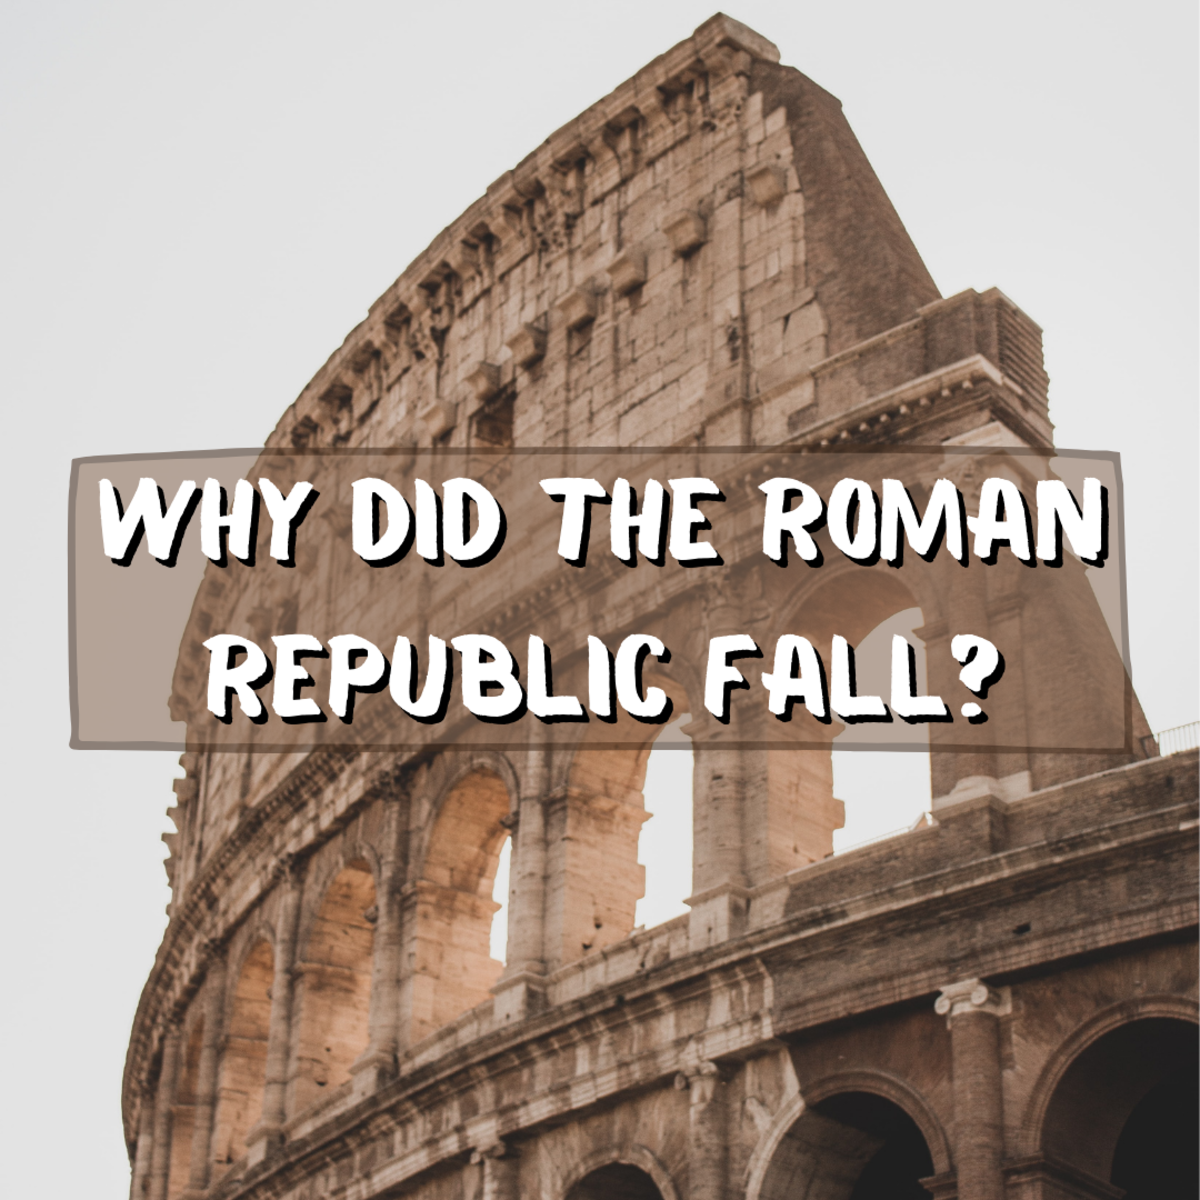 What Led to the Fall of the Roman Republic?